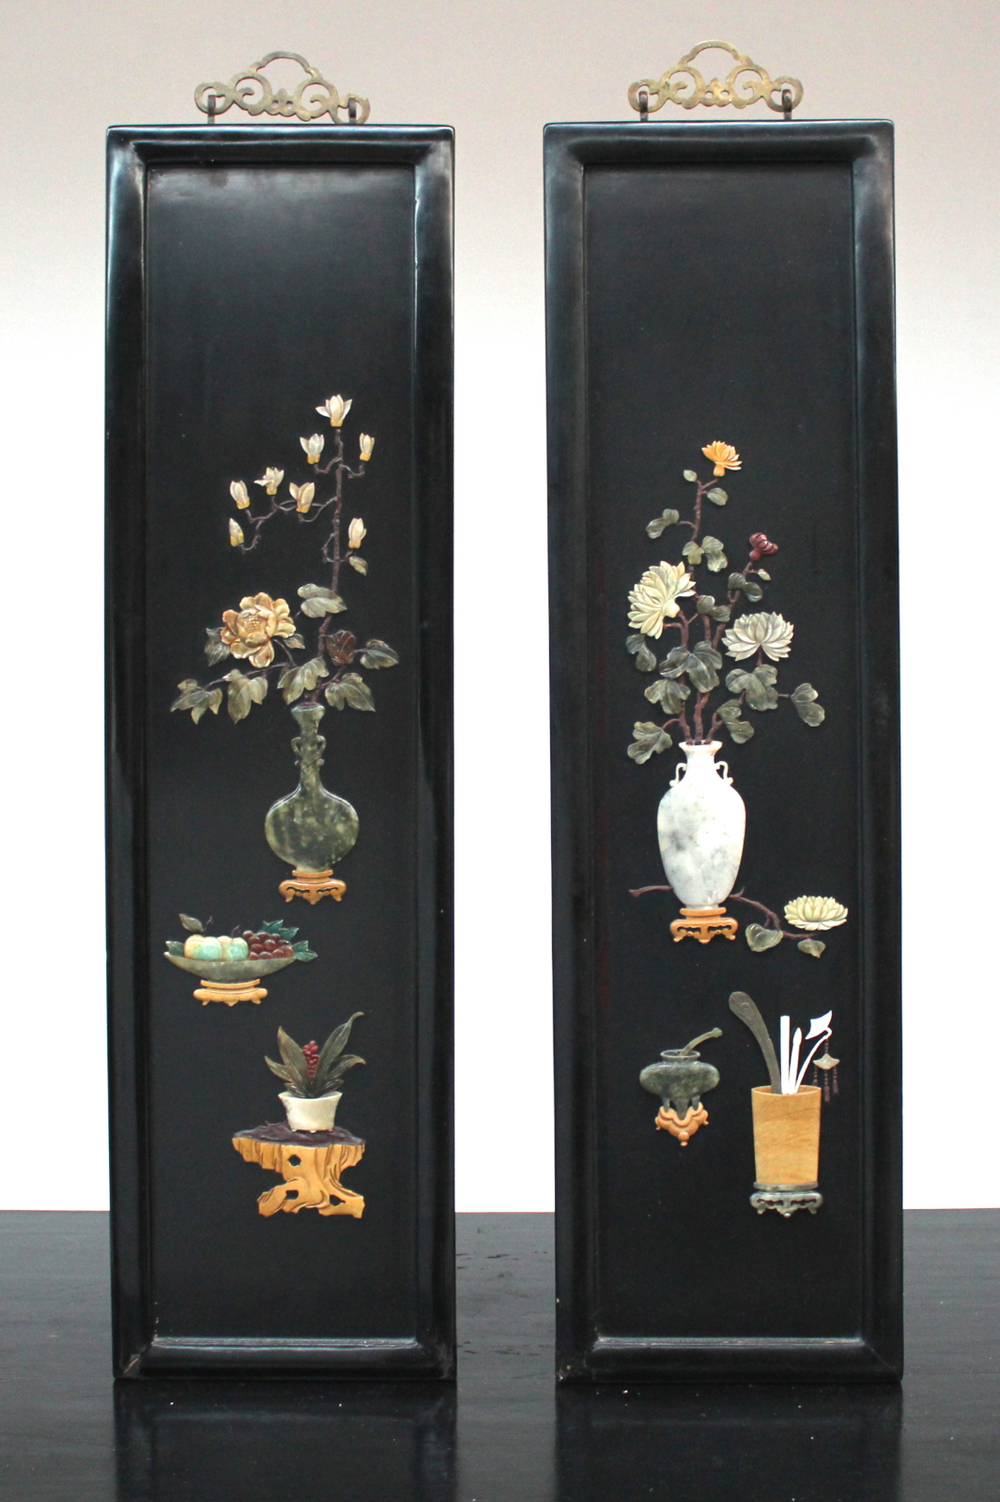 A pair of Chinese lacquer and semi-precious stones panels, early 20th C.